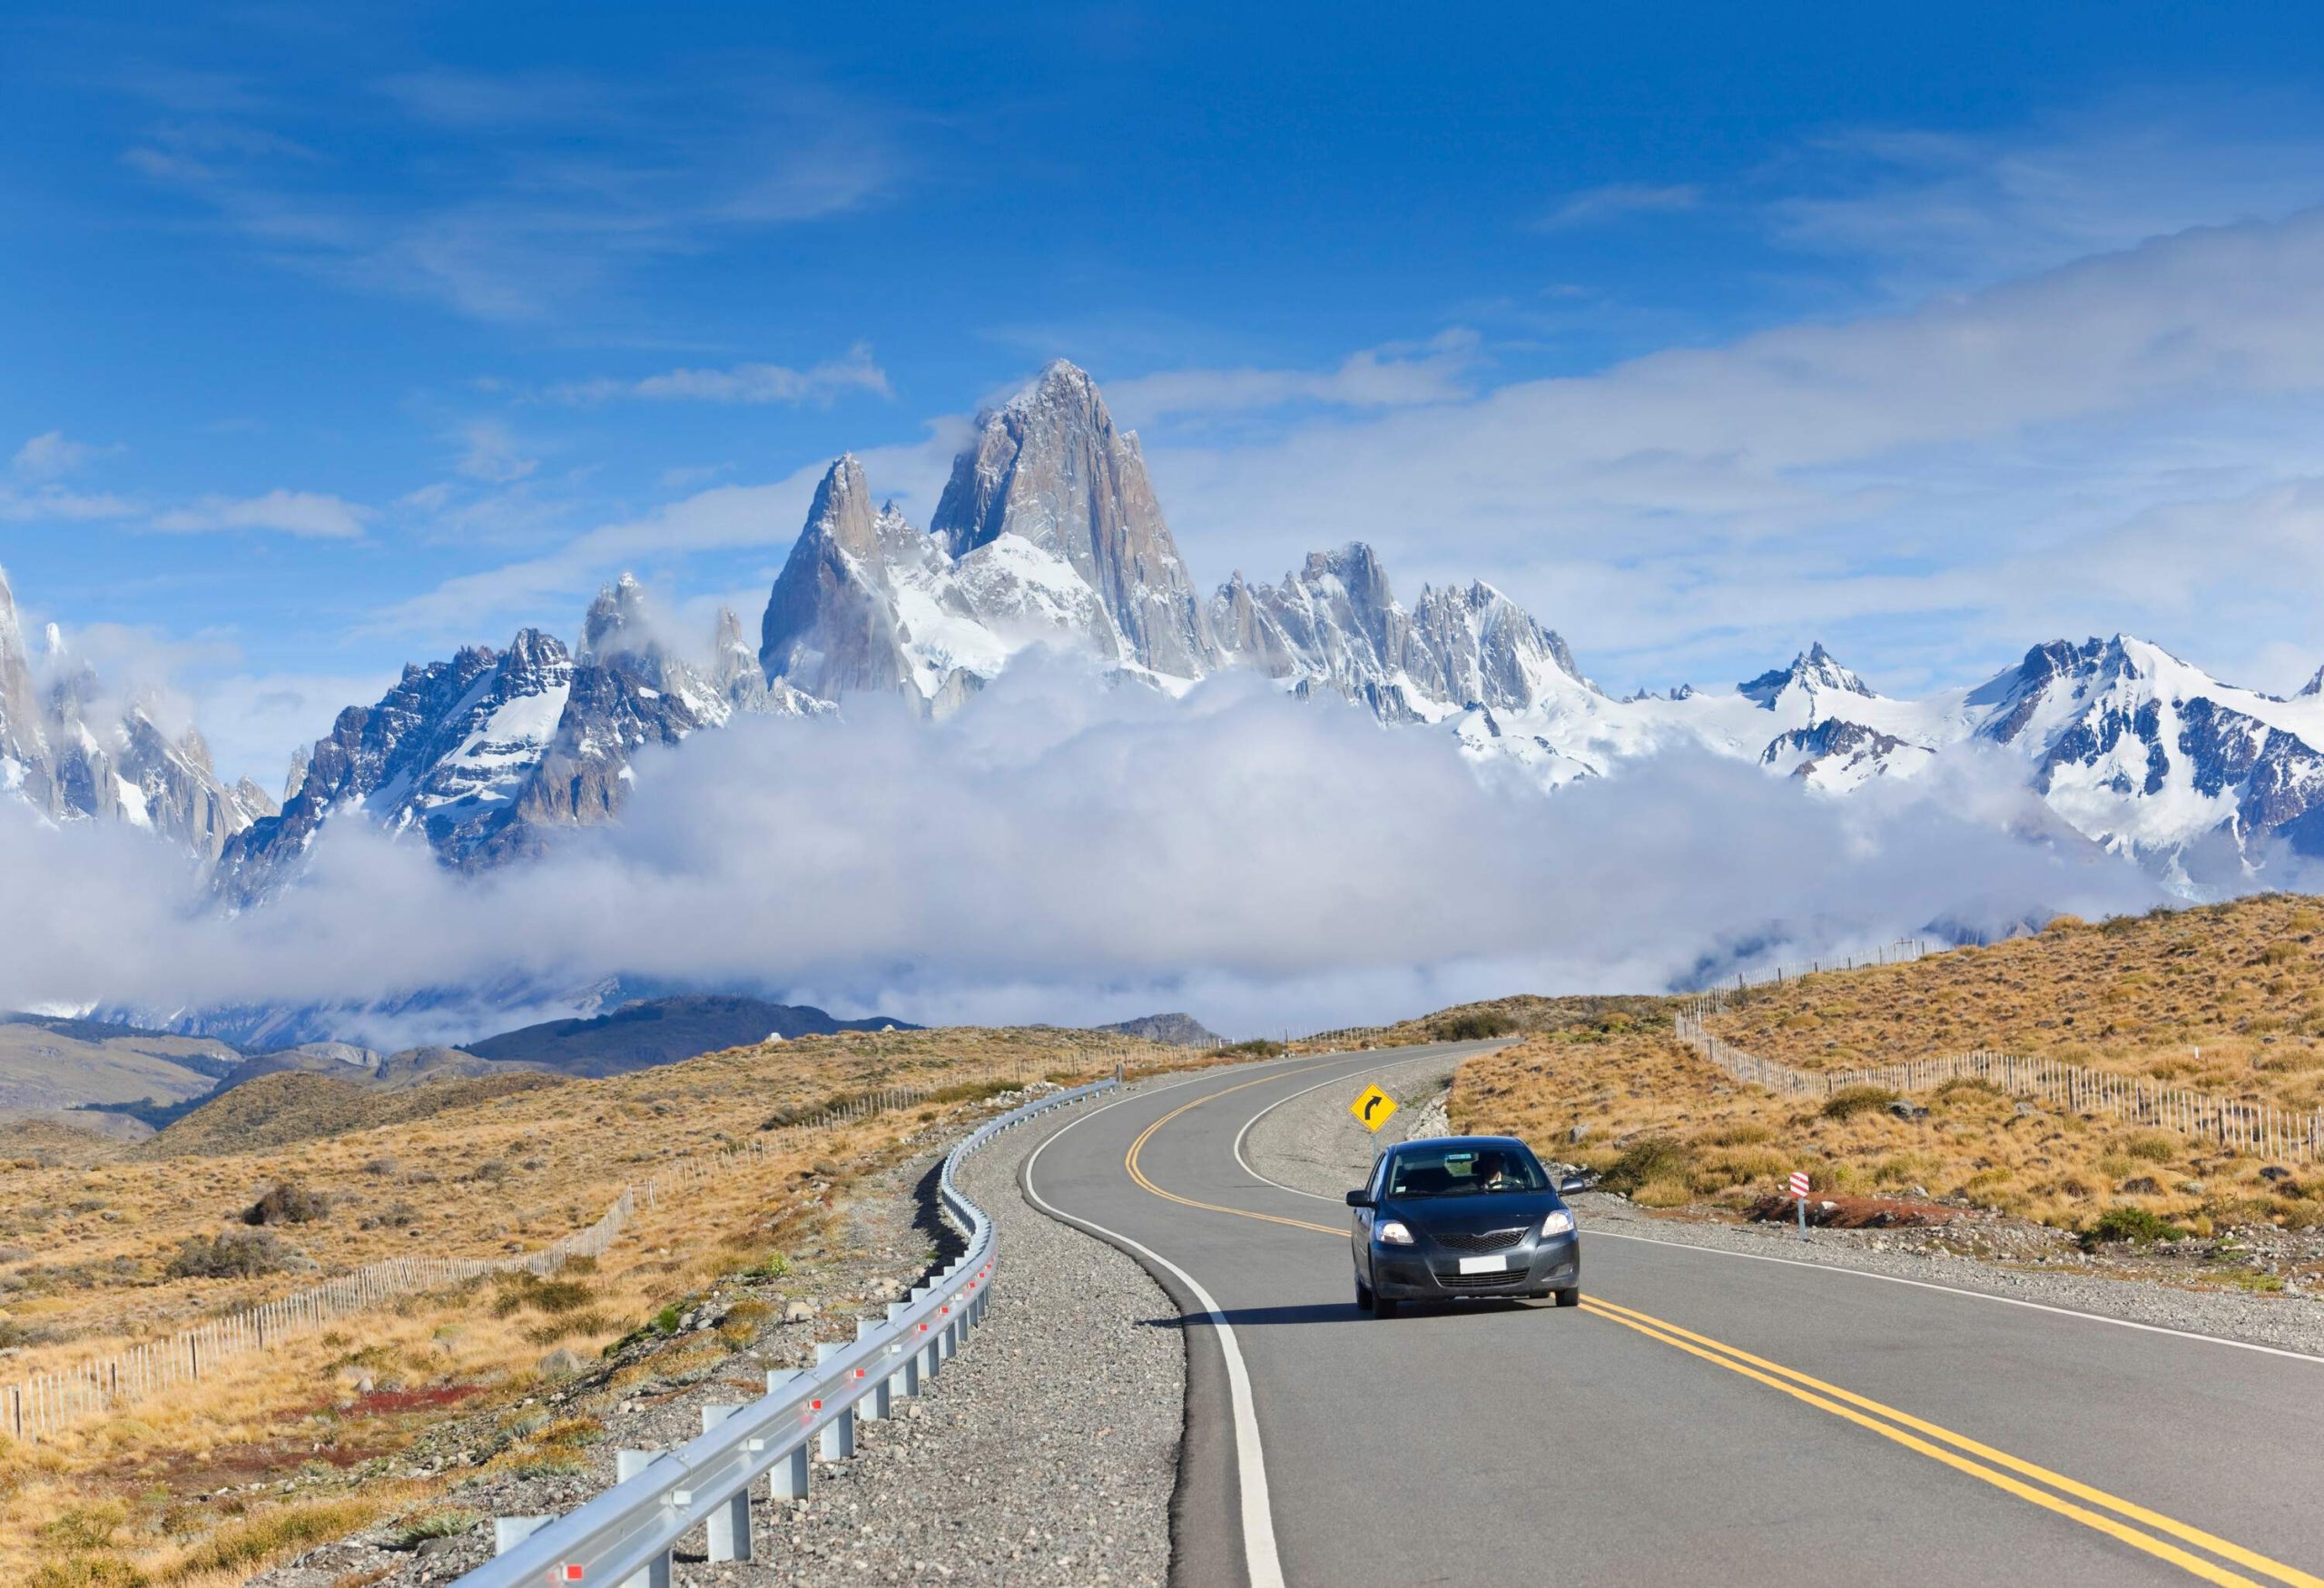 Rising triumphantly in the background, the iconic Mount Fitz Roy, a striking granite peak that towers over the Patagonian landscape, shrouded in mist, creates a dramatic and unforgettable scene as a car navigates the winding road away from this natural wonder.